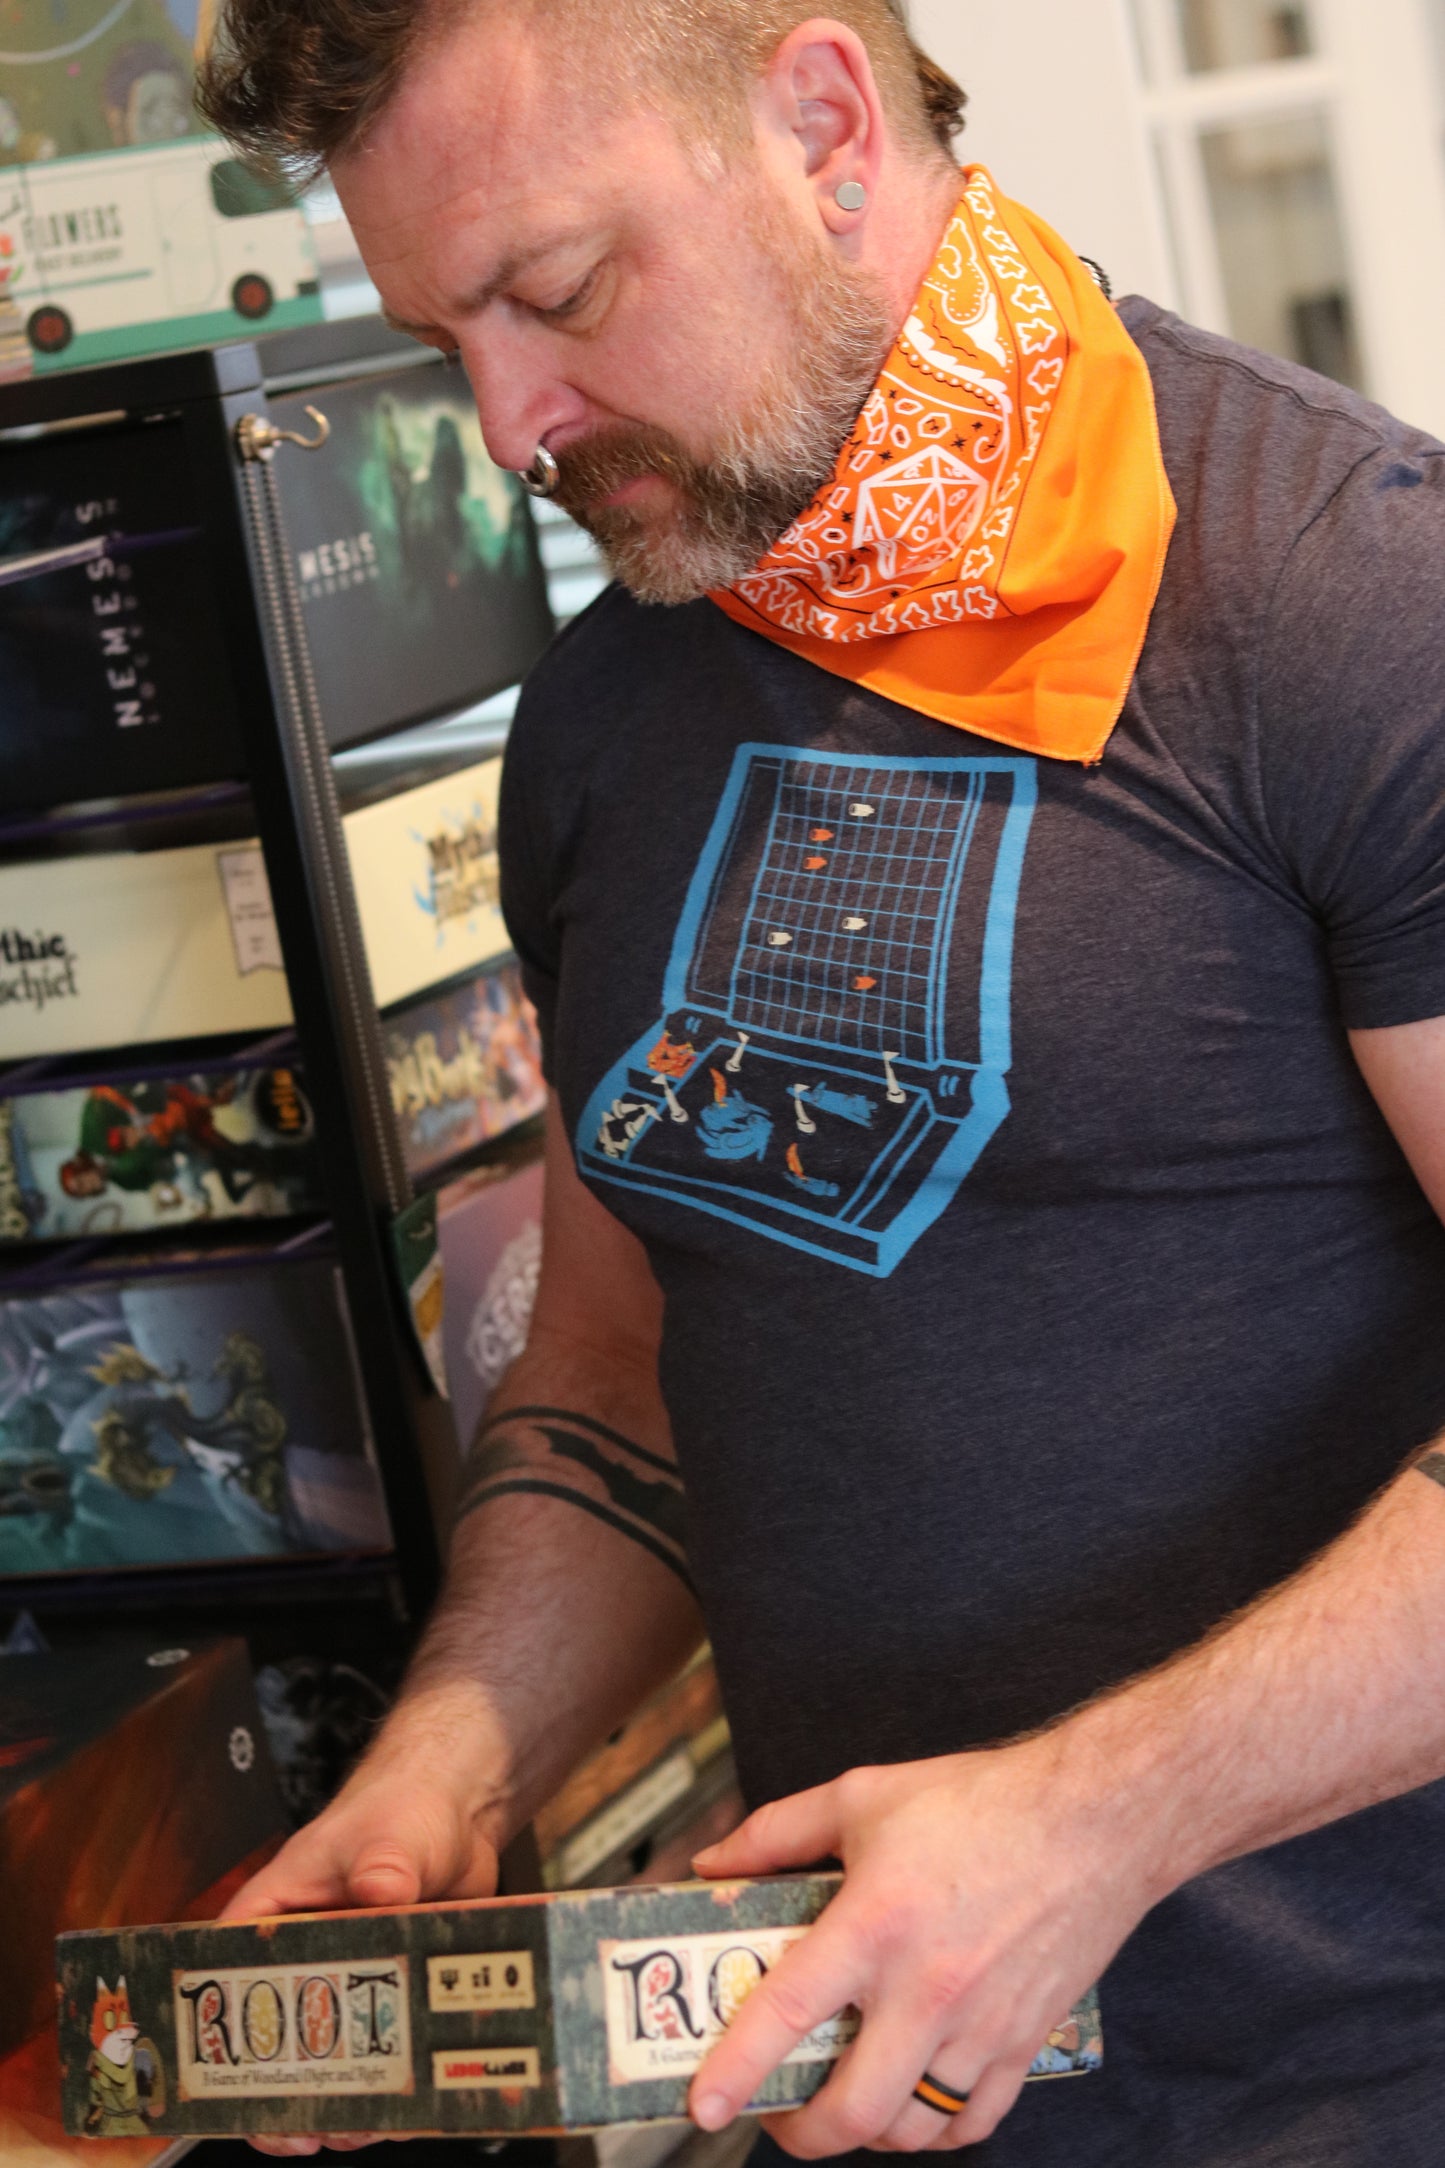 Handsome bearded man with nose ring holding root board game, wearing orange D20 dungeons and dragons theme bandana around neck